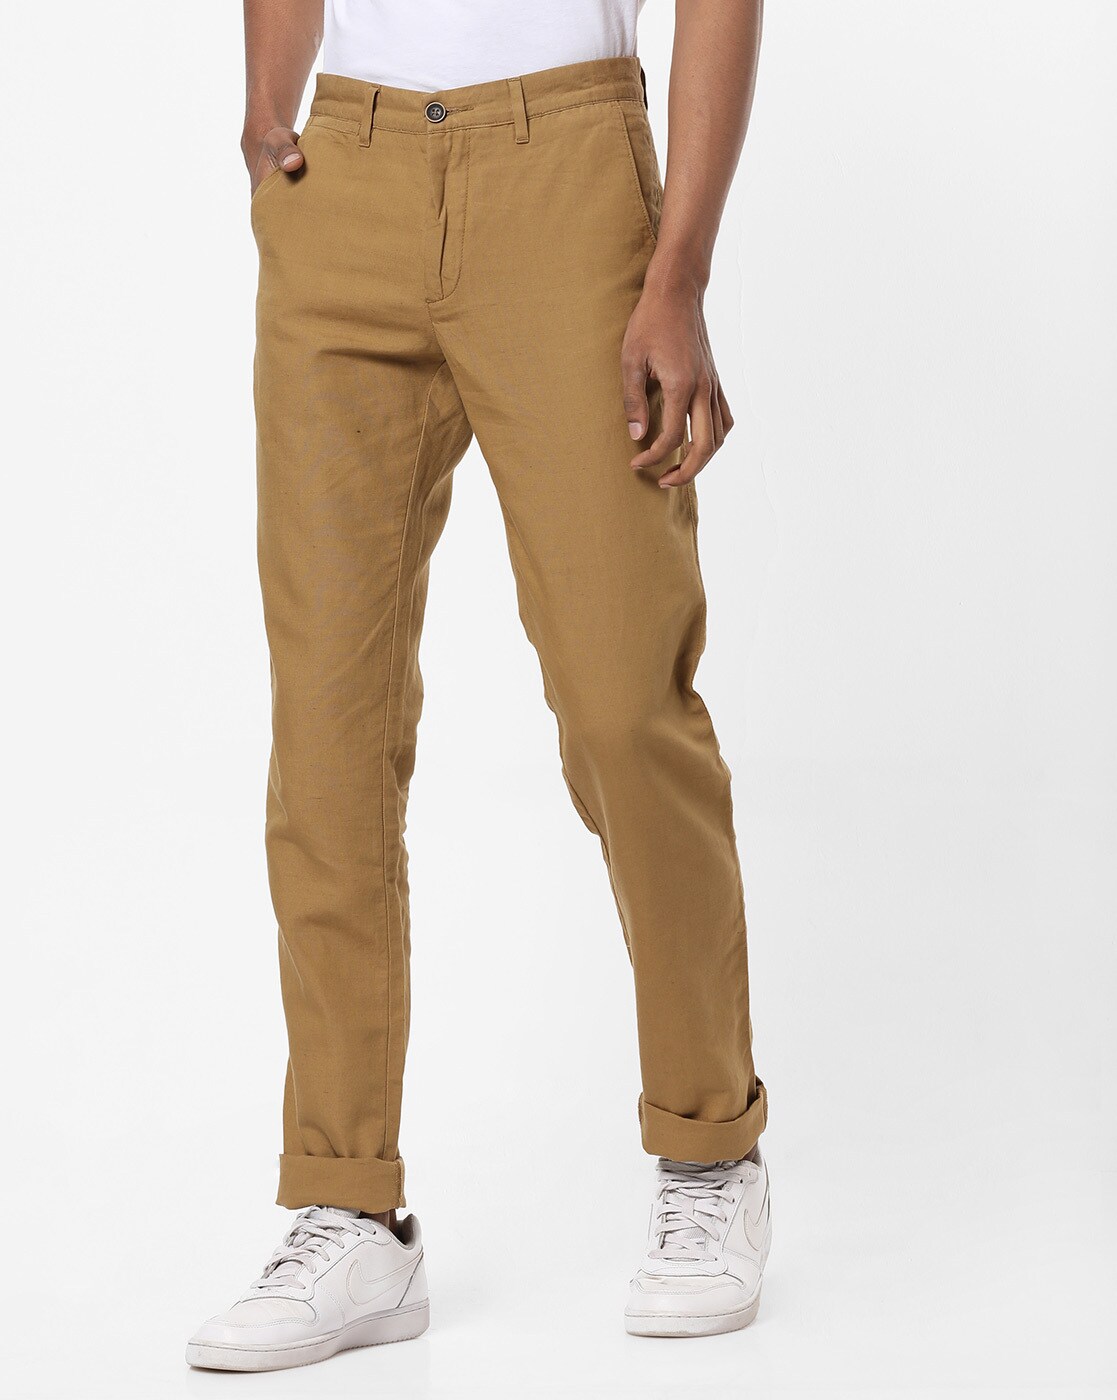 Peter England formal pants for men are all about neat cuts and style  HT  Shop Now